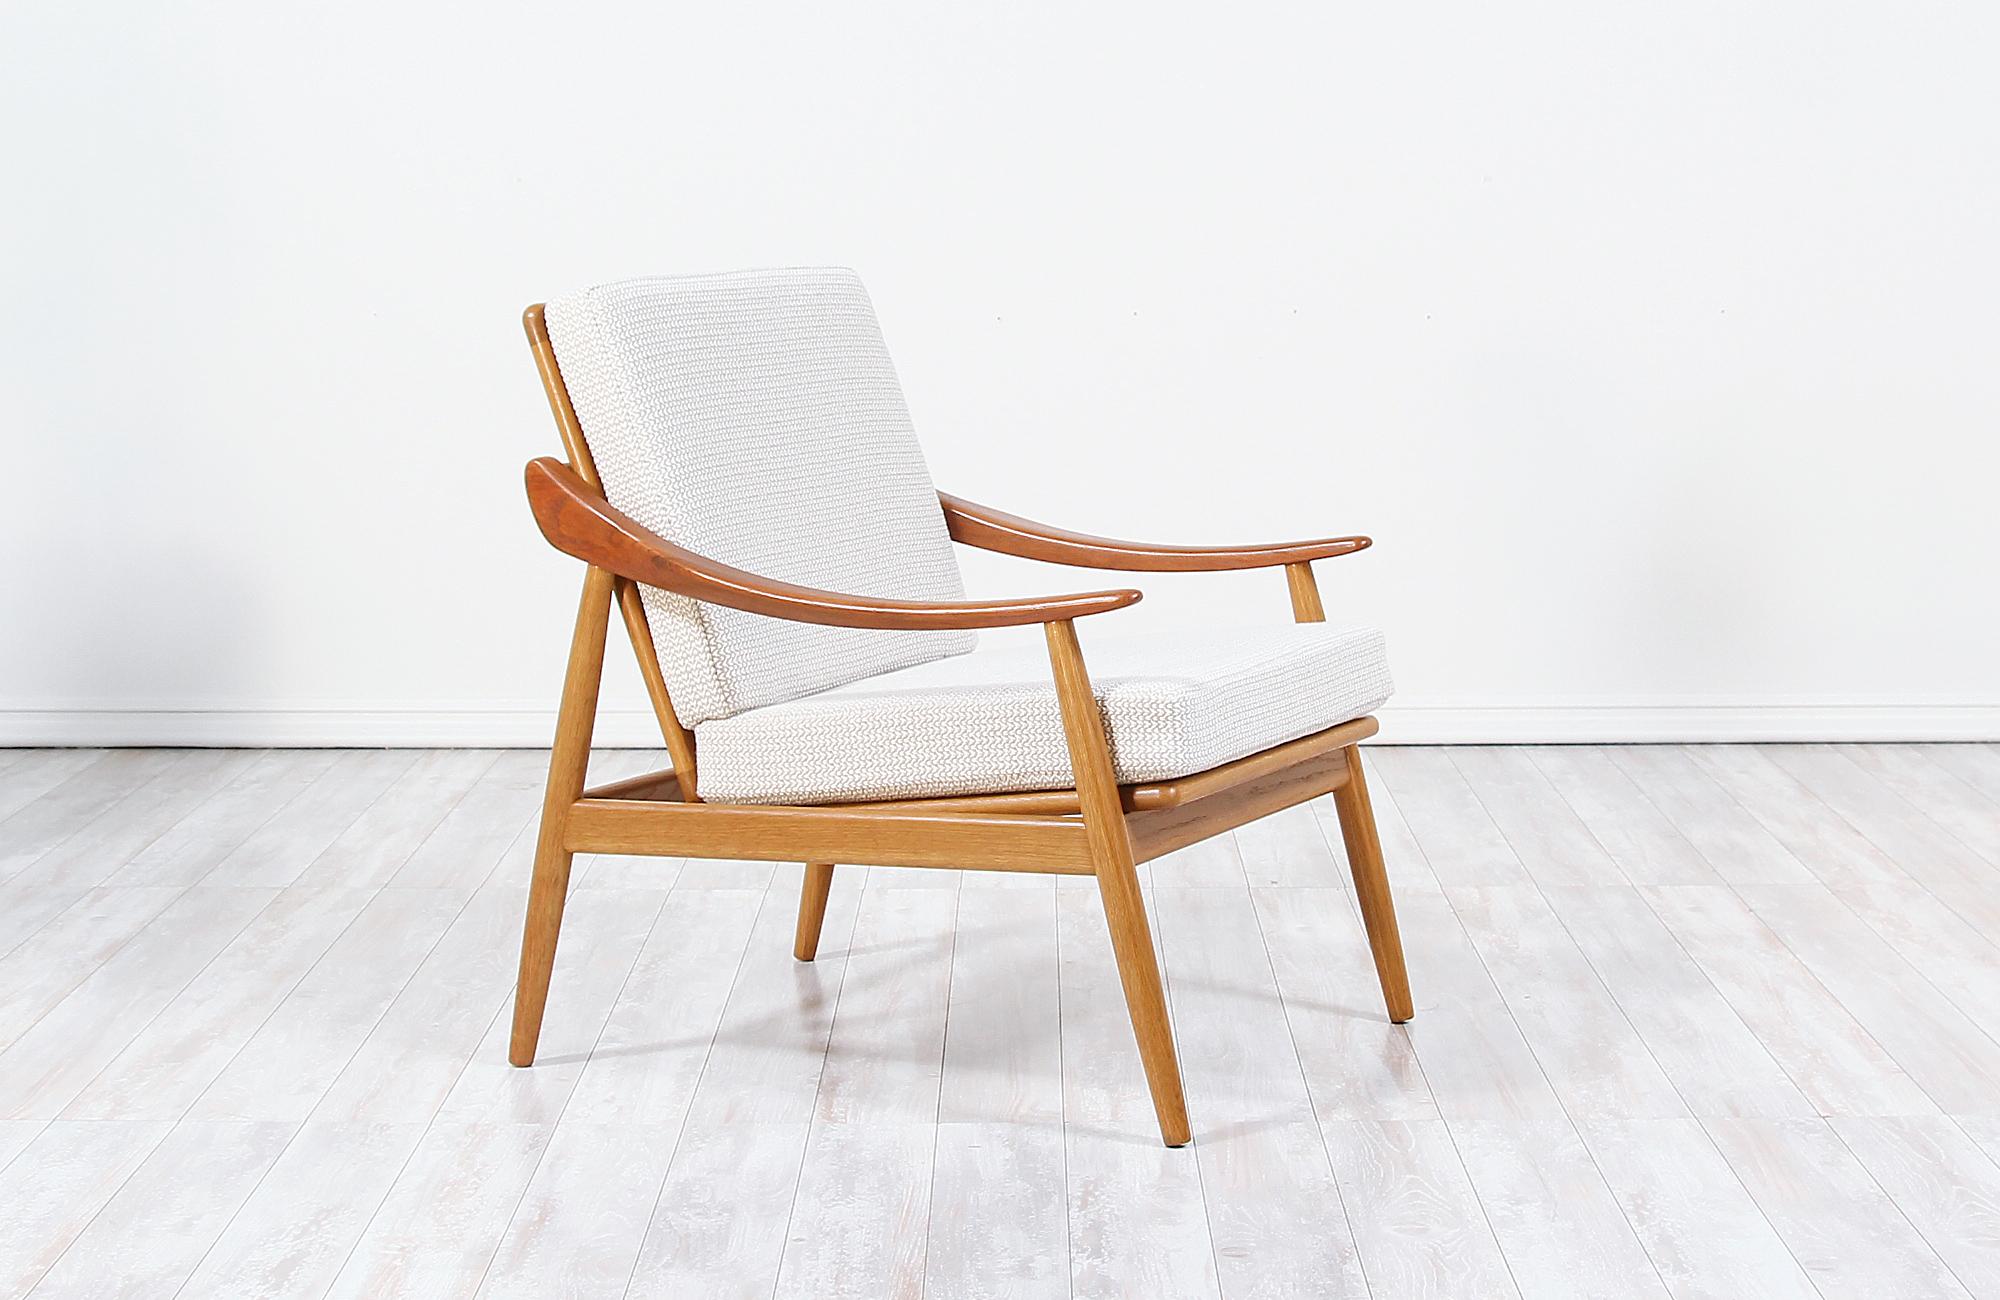 Stylish reclining Danish Modern lounge chair designed by Kurt Østervig for Jason Møbler in Denmark in 1956. This beautiful Model 301 lounge chair features a solid oak wood frame with curved teak wood sculpted armrests balancing the design's symmetry